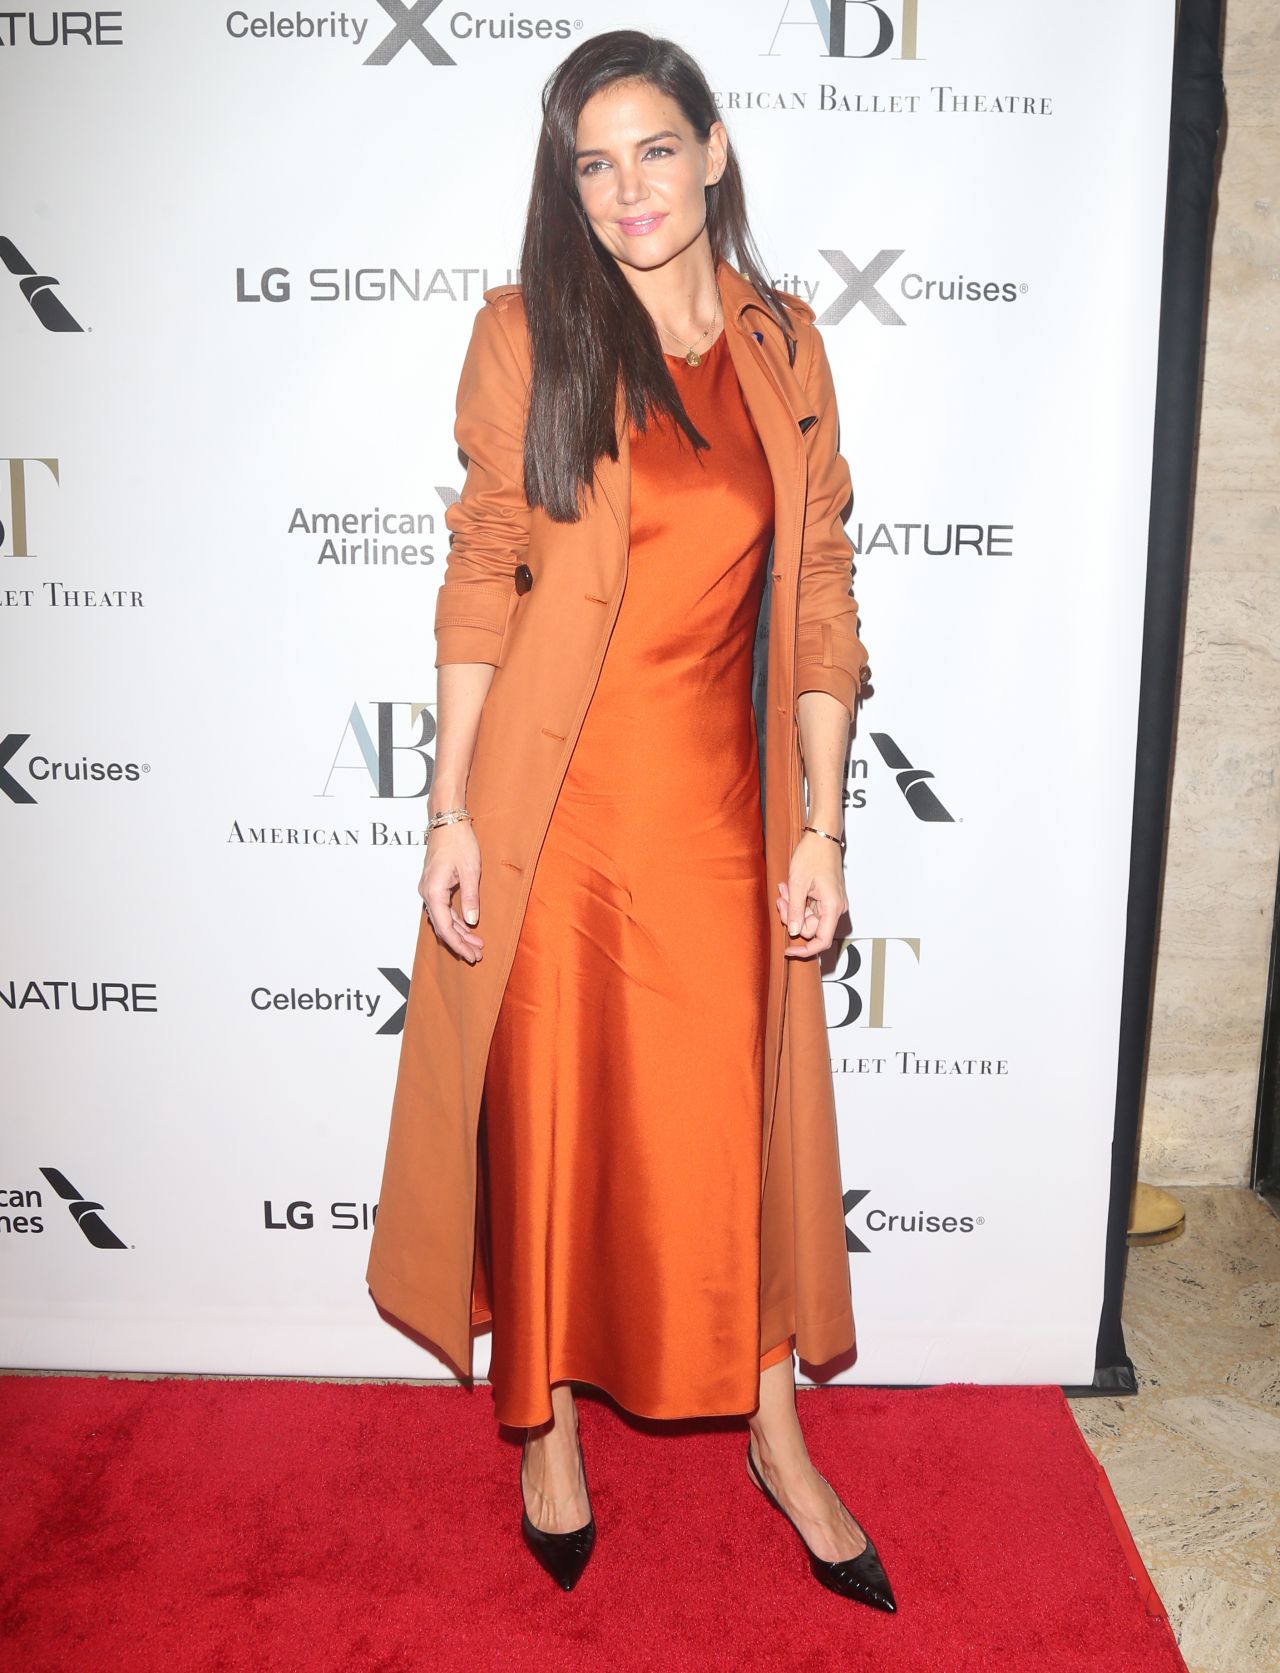 Katie Holmes looking good in orange at some event in NYC